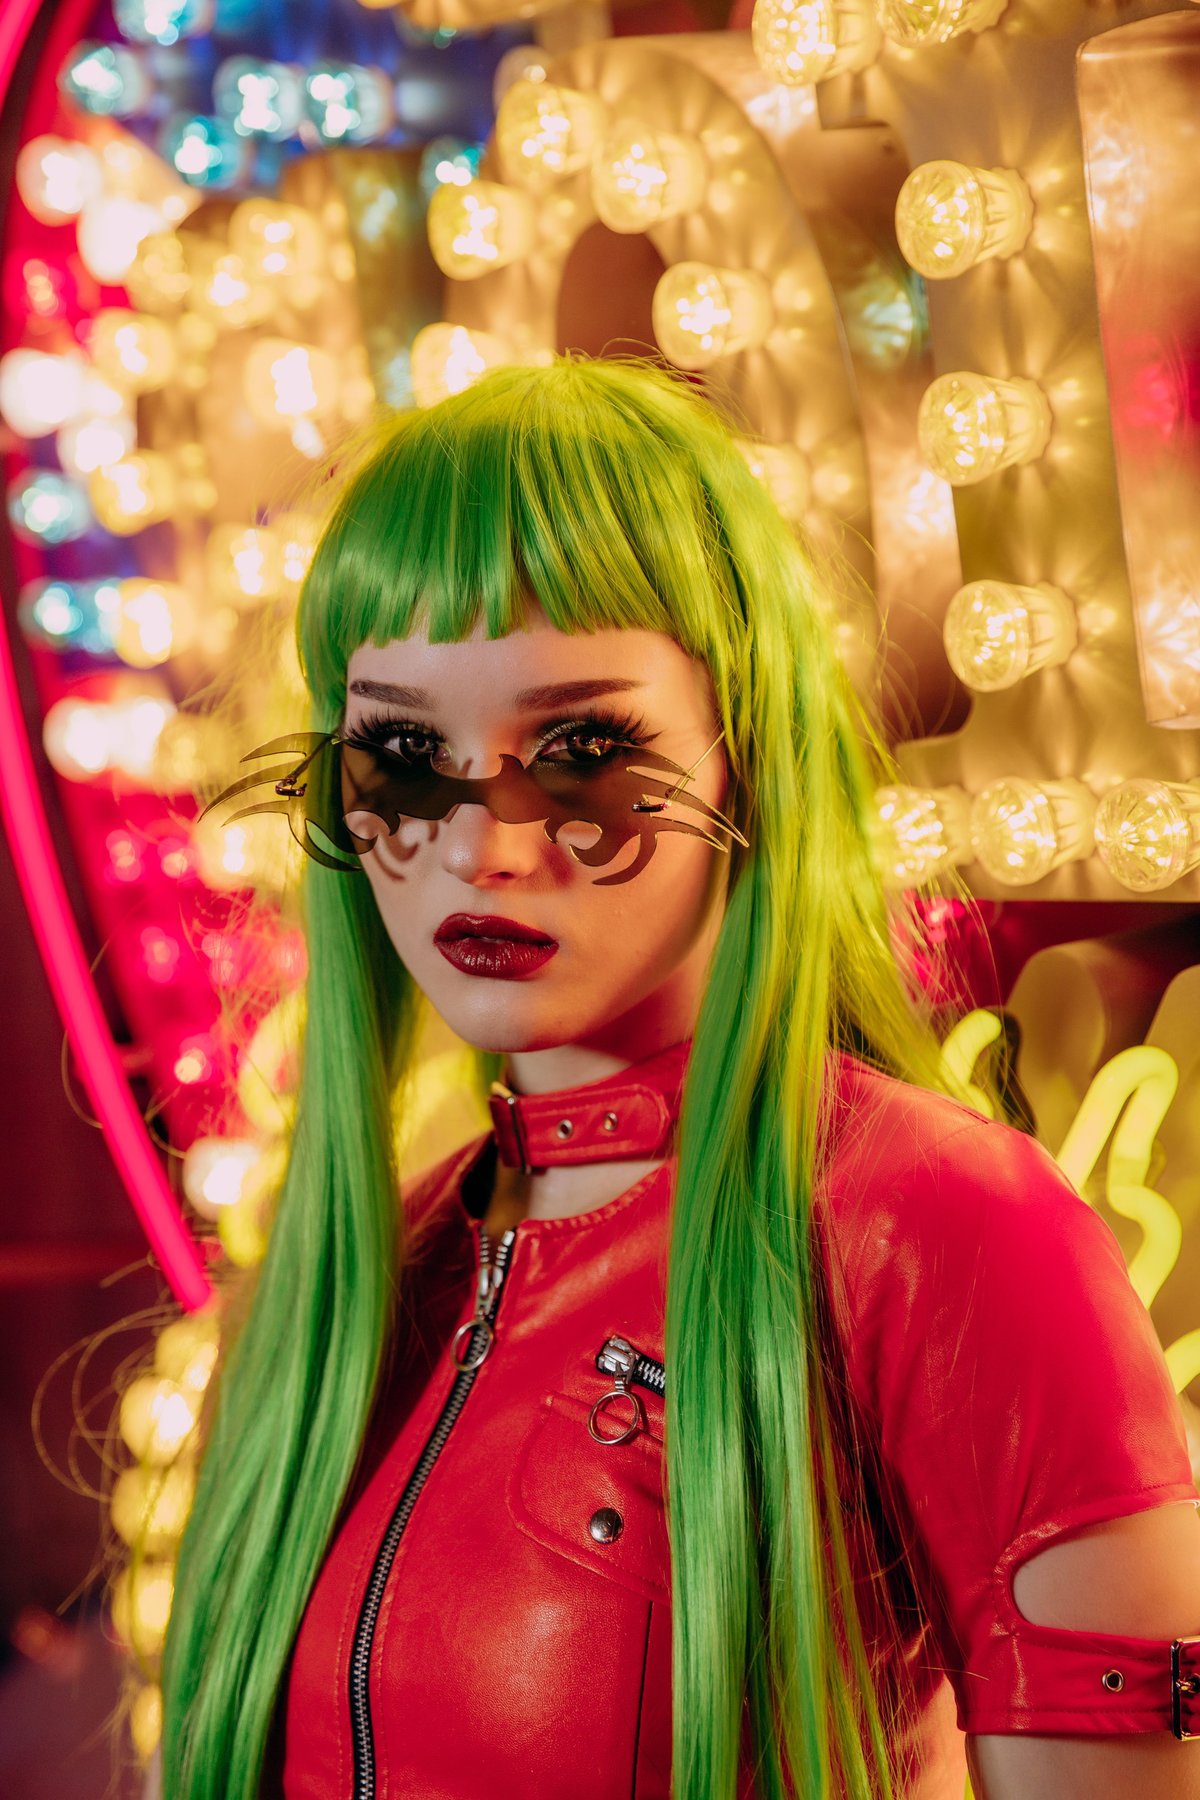 Saida leaning against an old school light-bulb sign, wearing  a red leather dress, a green wig and unusual sunglasses